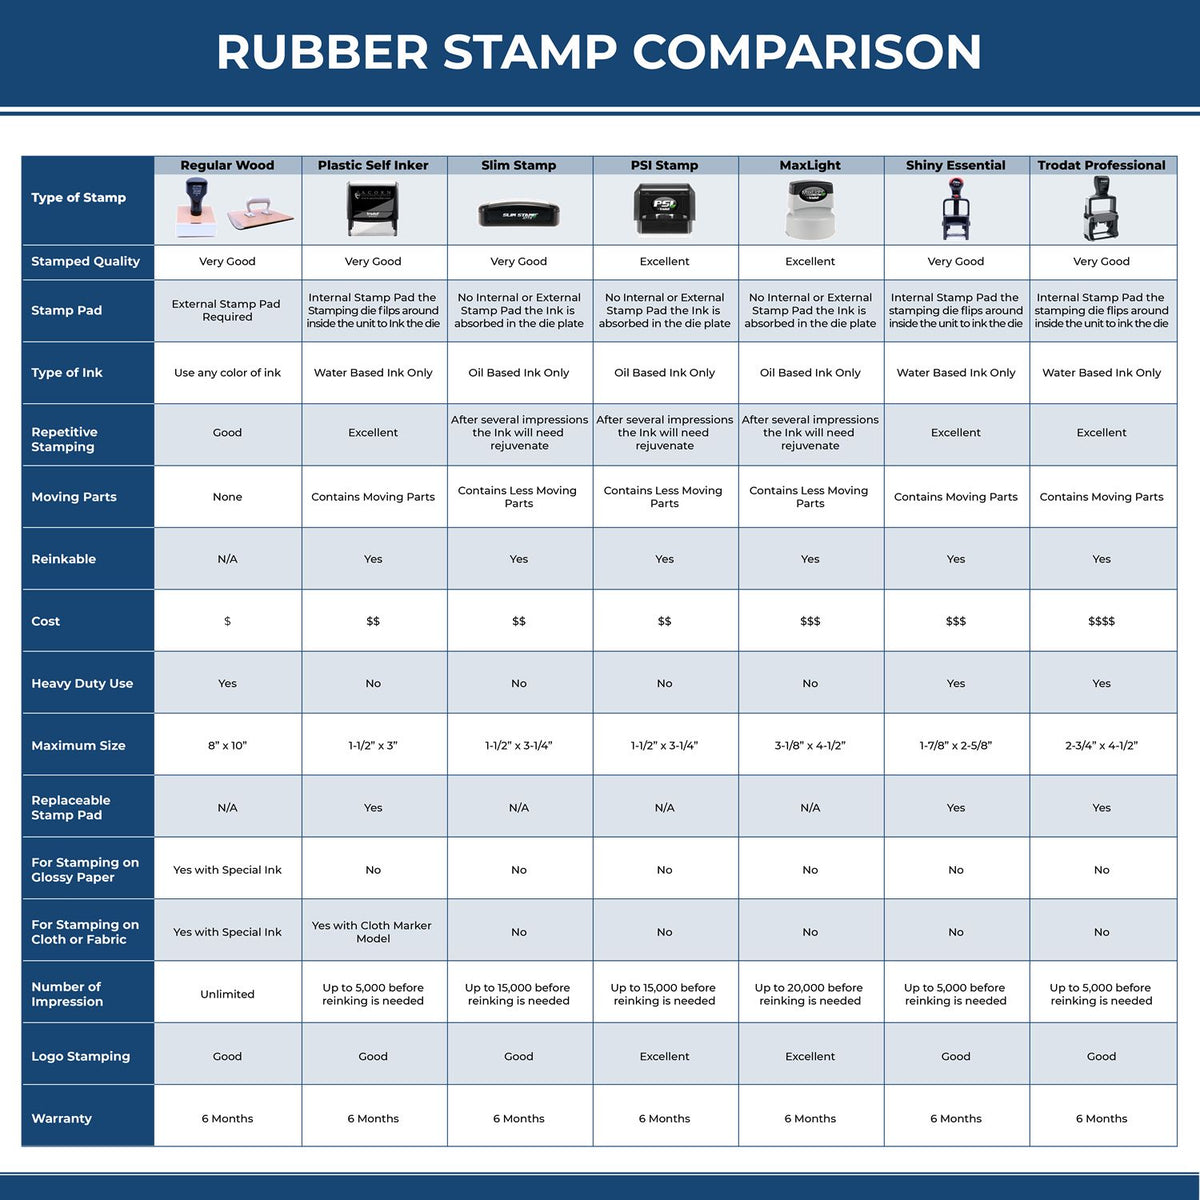 Large Contact Tracing Rubber Stamp 5500R Rubber Stamp Comparison